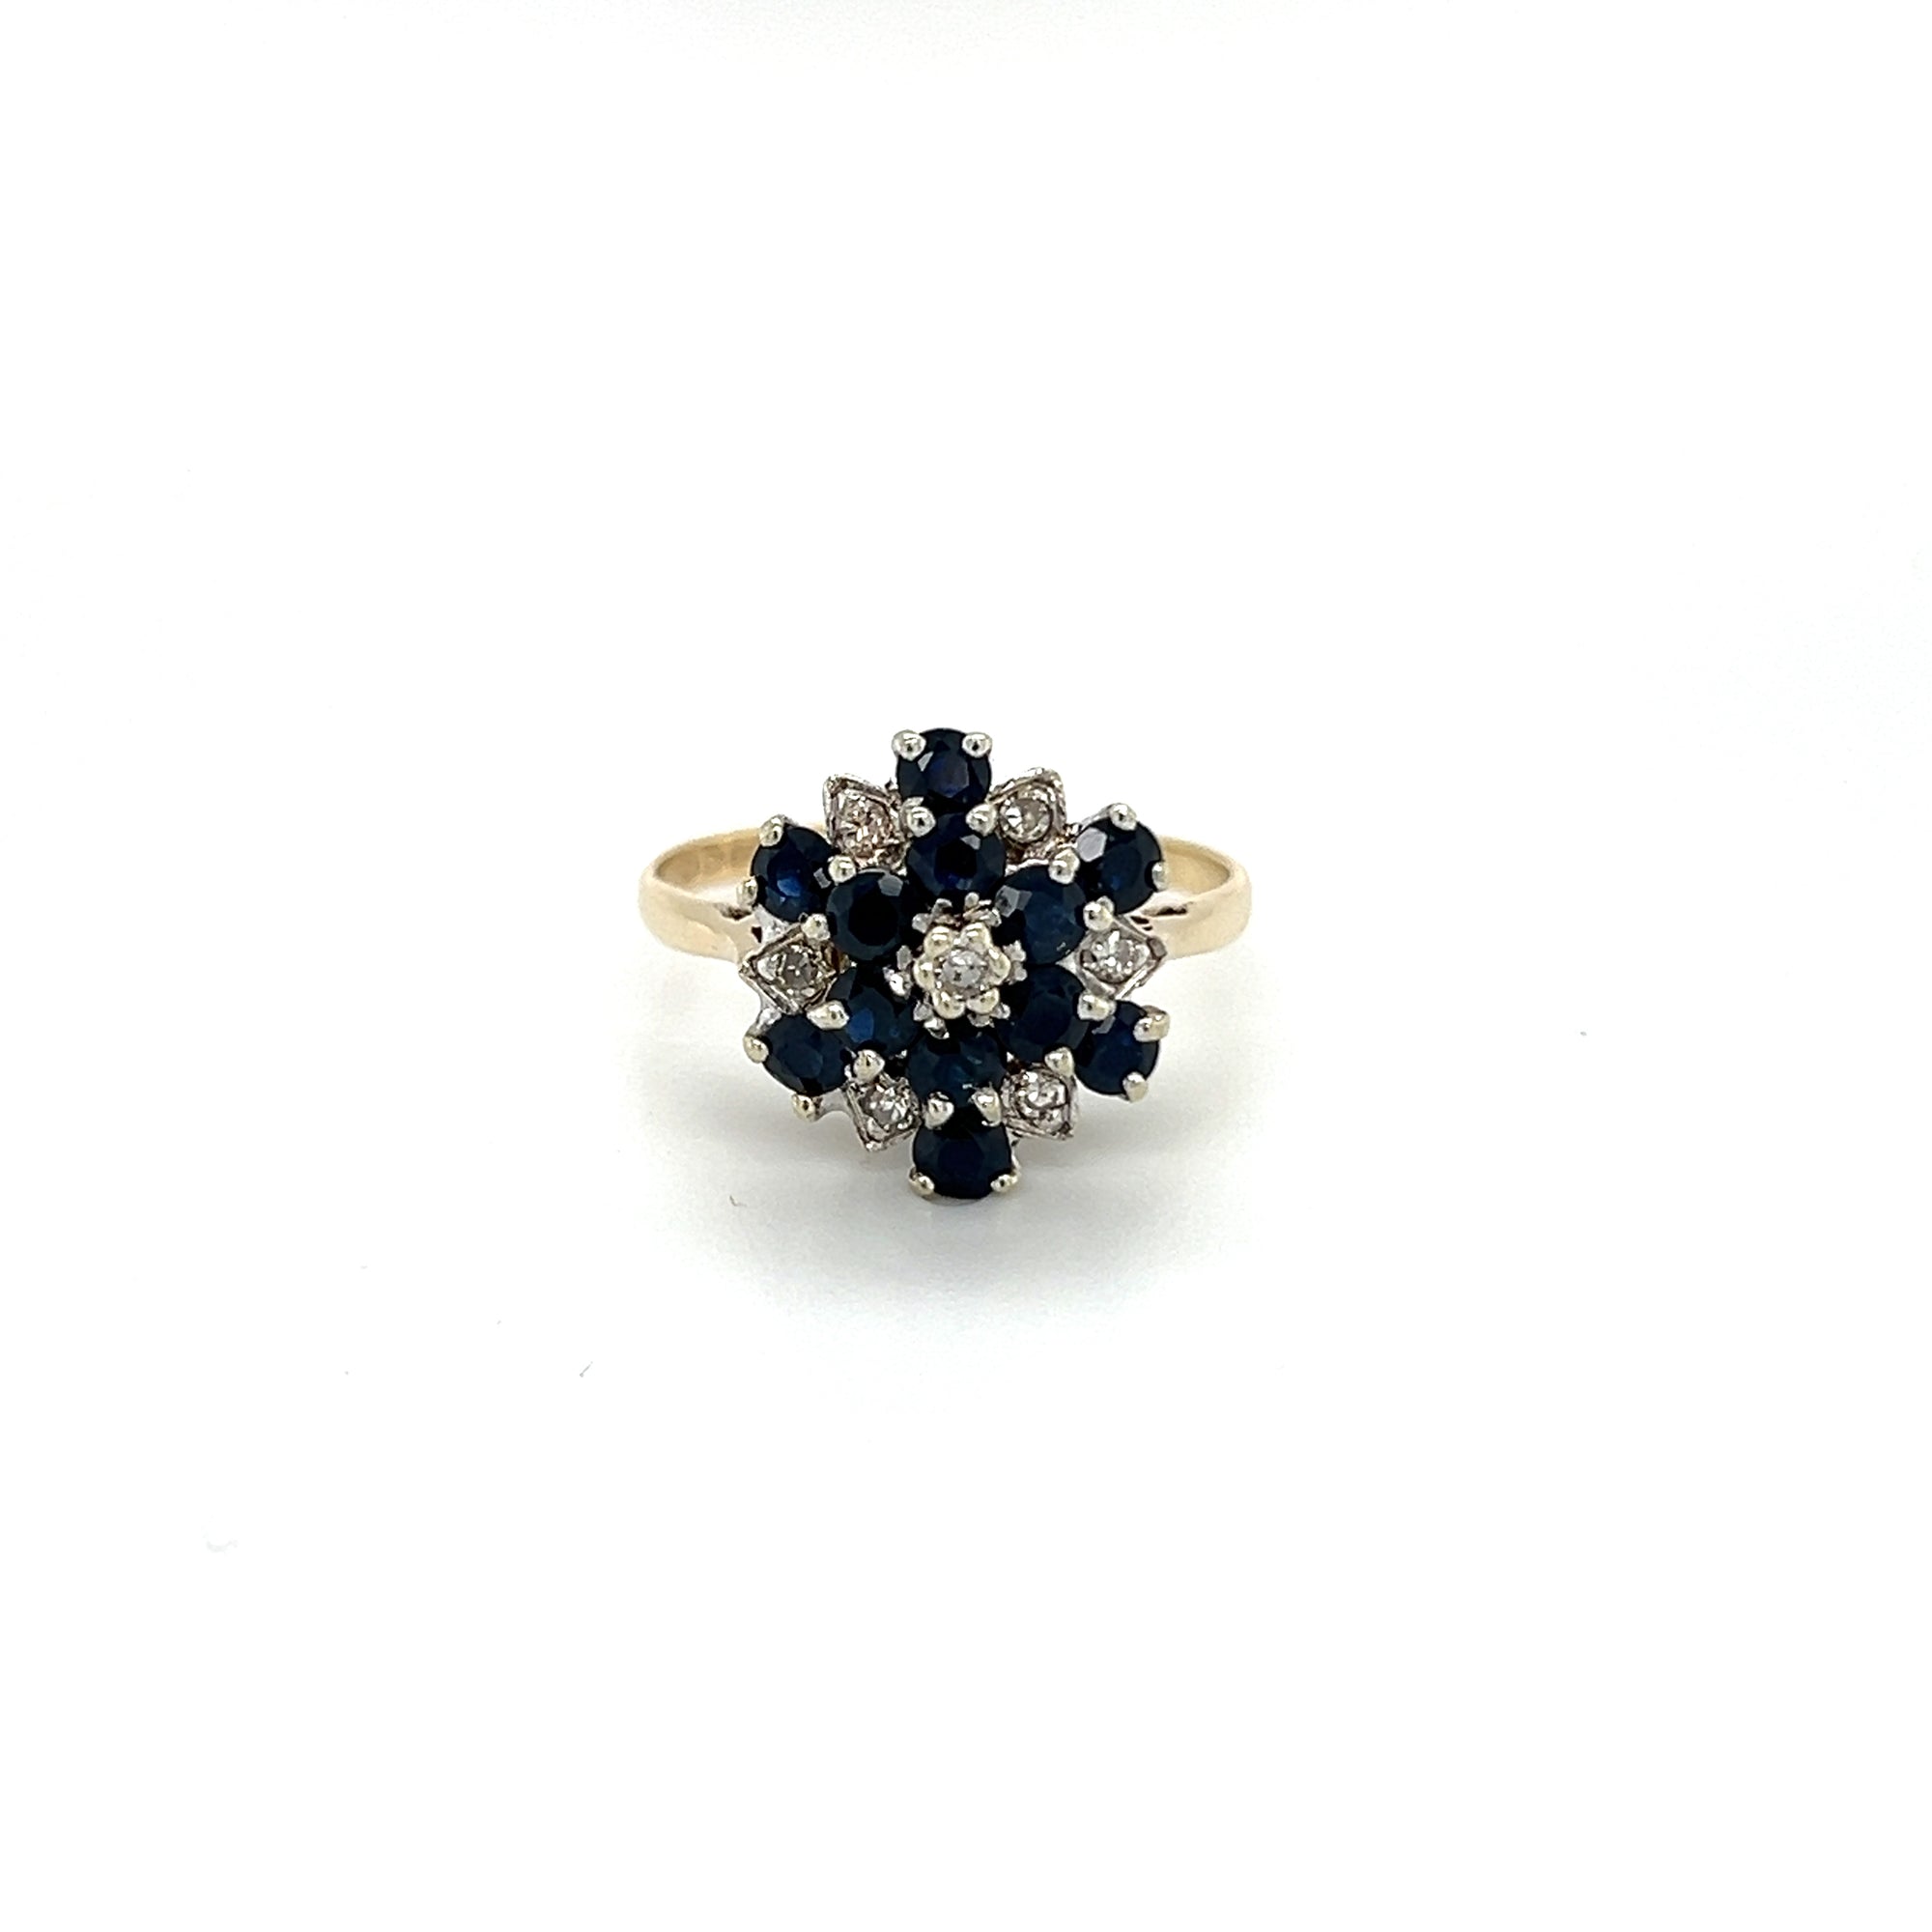 Vintage Round Shaped Shappire and Diamond Cluster Dress Ring in 9ct Yellow Gold